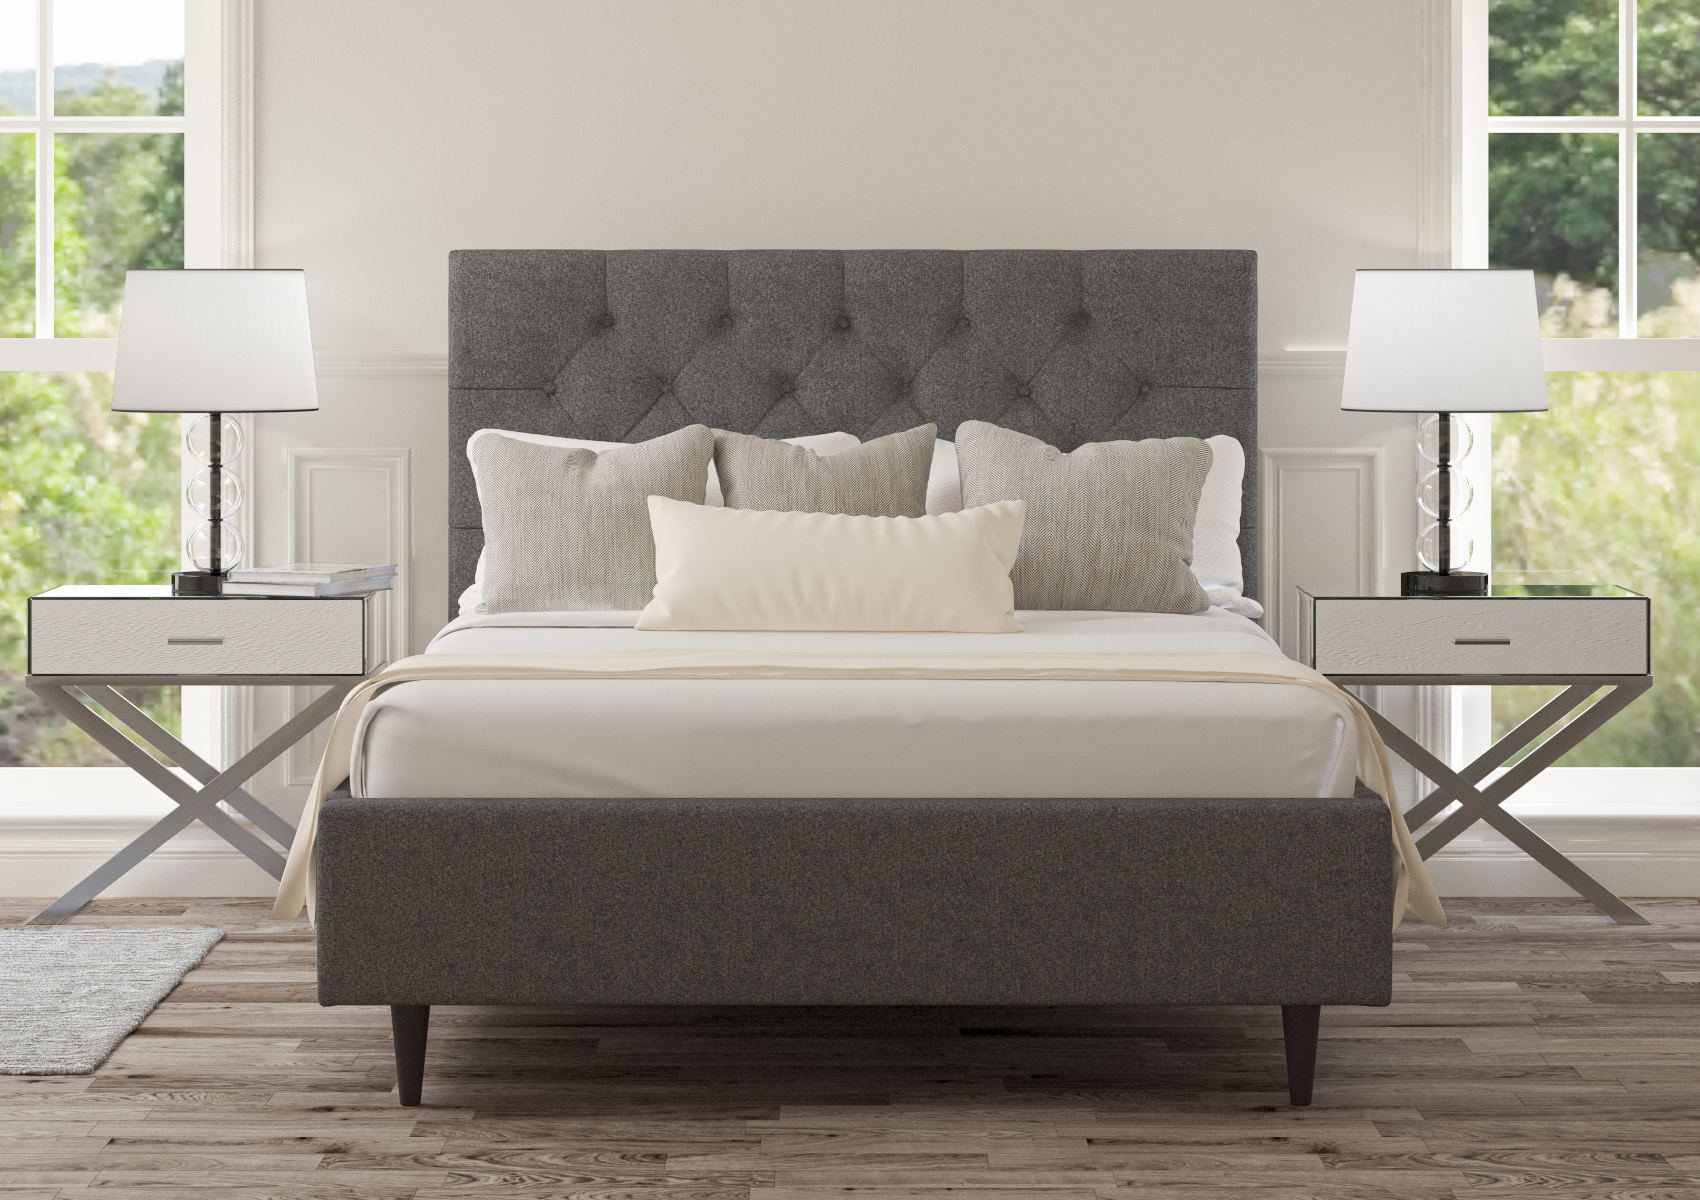 View Esther Arran Pebble Upholstered Double Bed Time4Sleep information